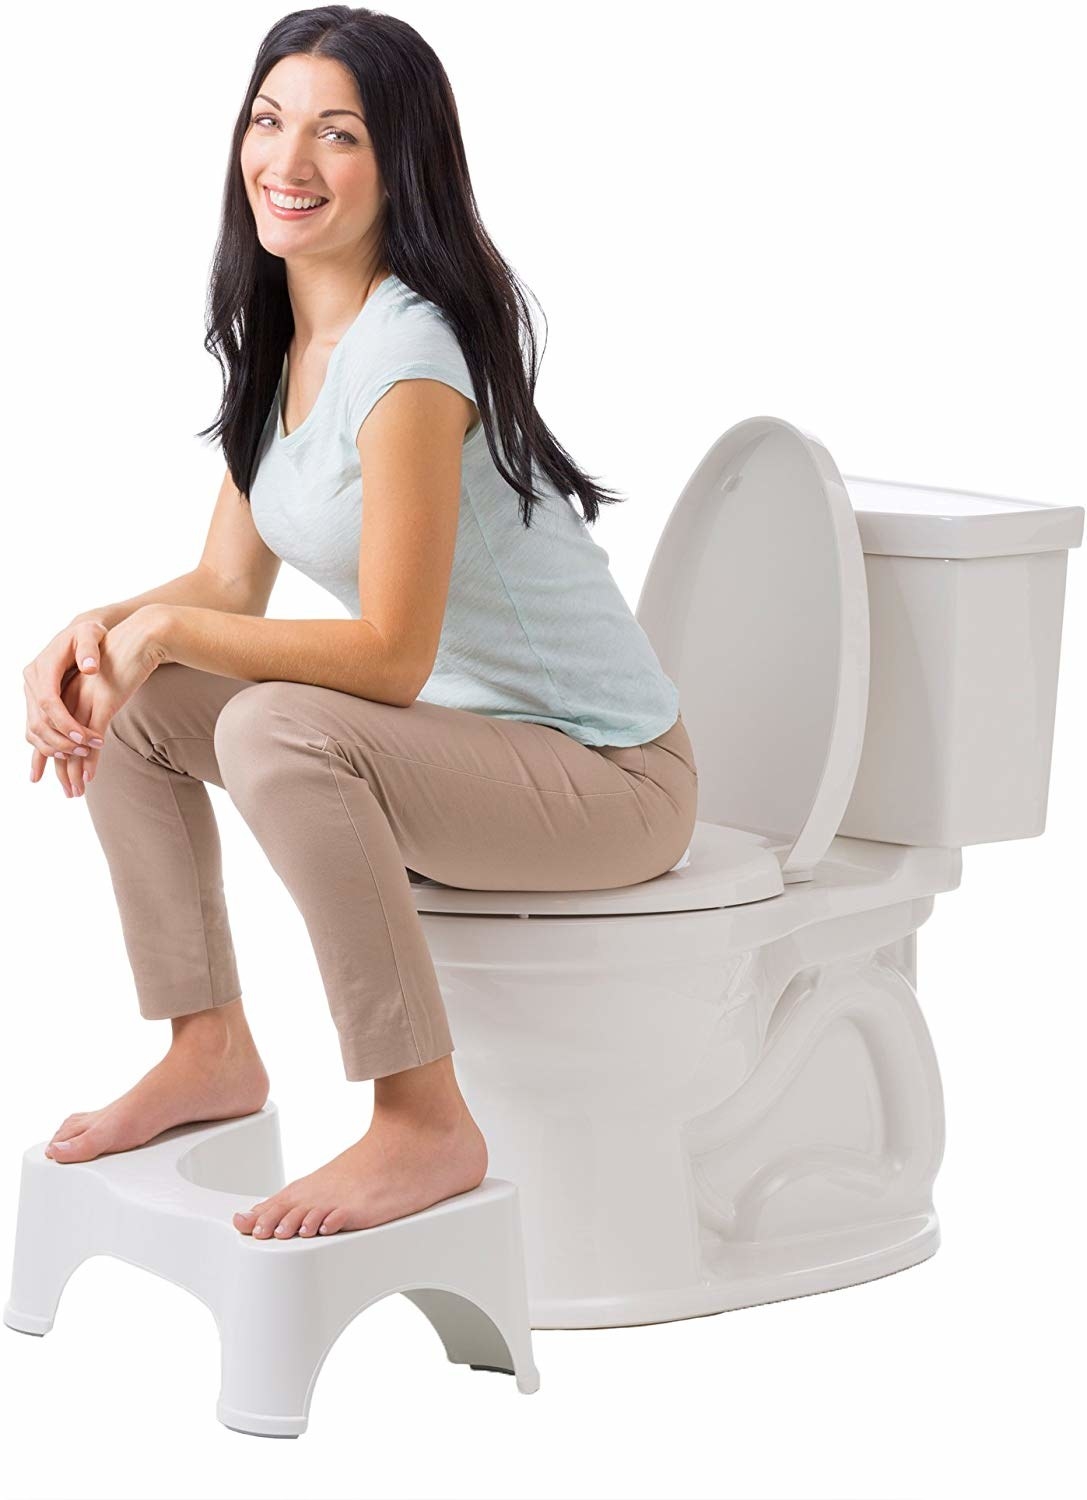 model sitting on a toilet with their feet elevated on the squatty potty